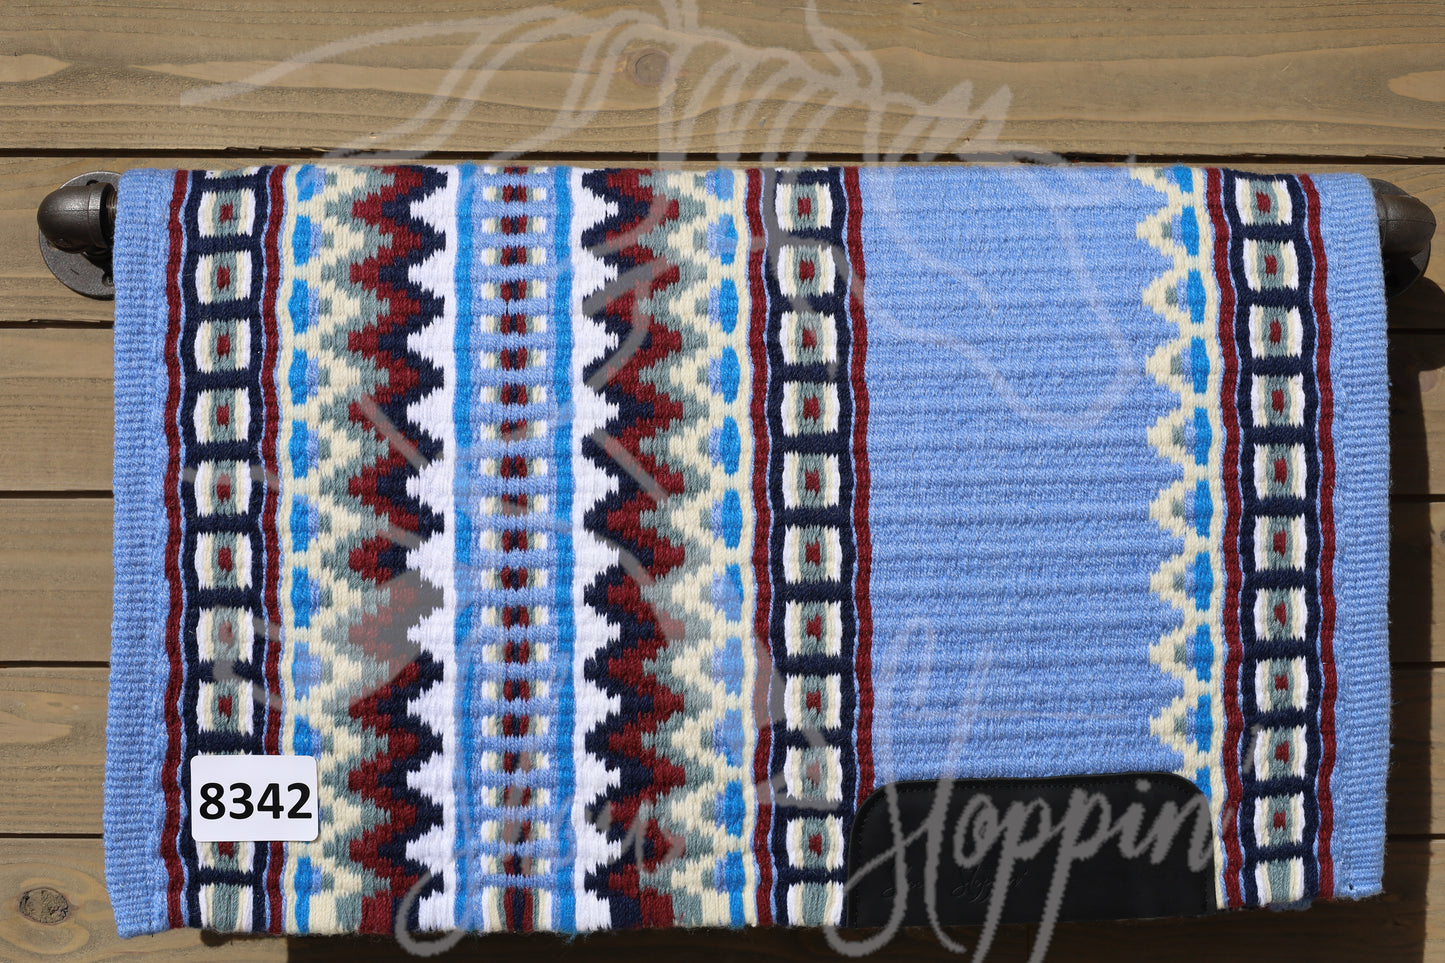 reorder Show Stoppin | Show Blanket | 8342